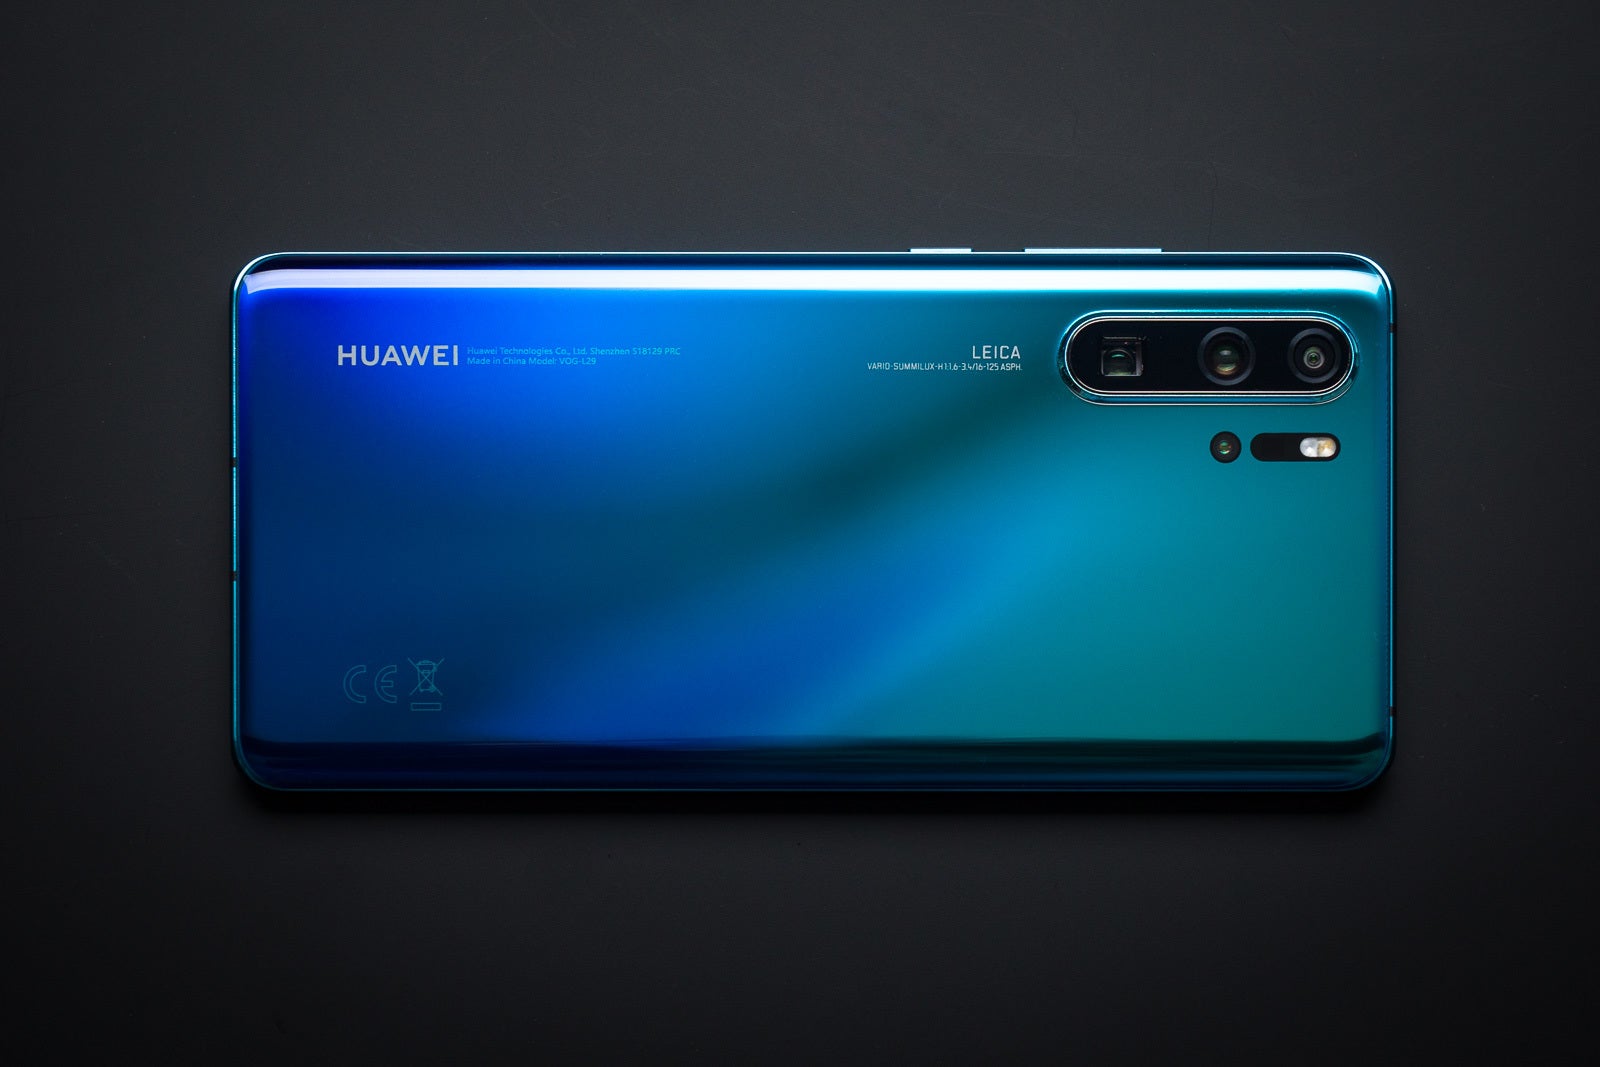 The P30 Pro is the current apogee of Huawei's design - Top companies reveal to us the twisty path of smartphone design